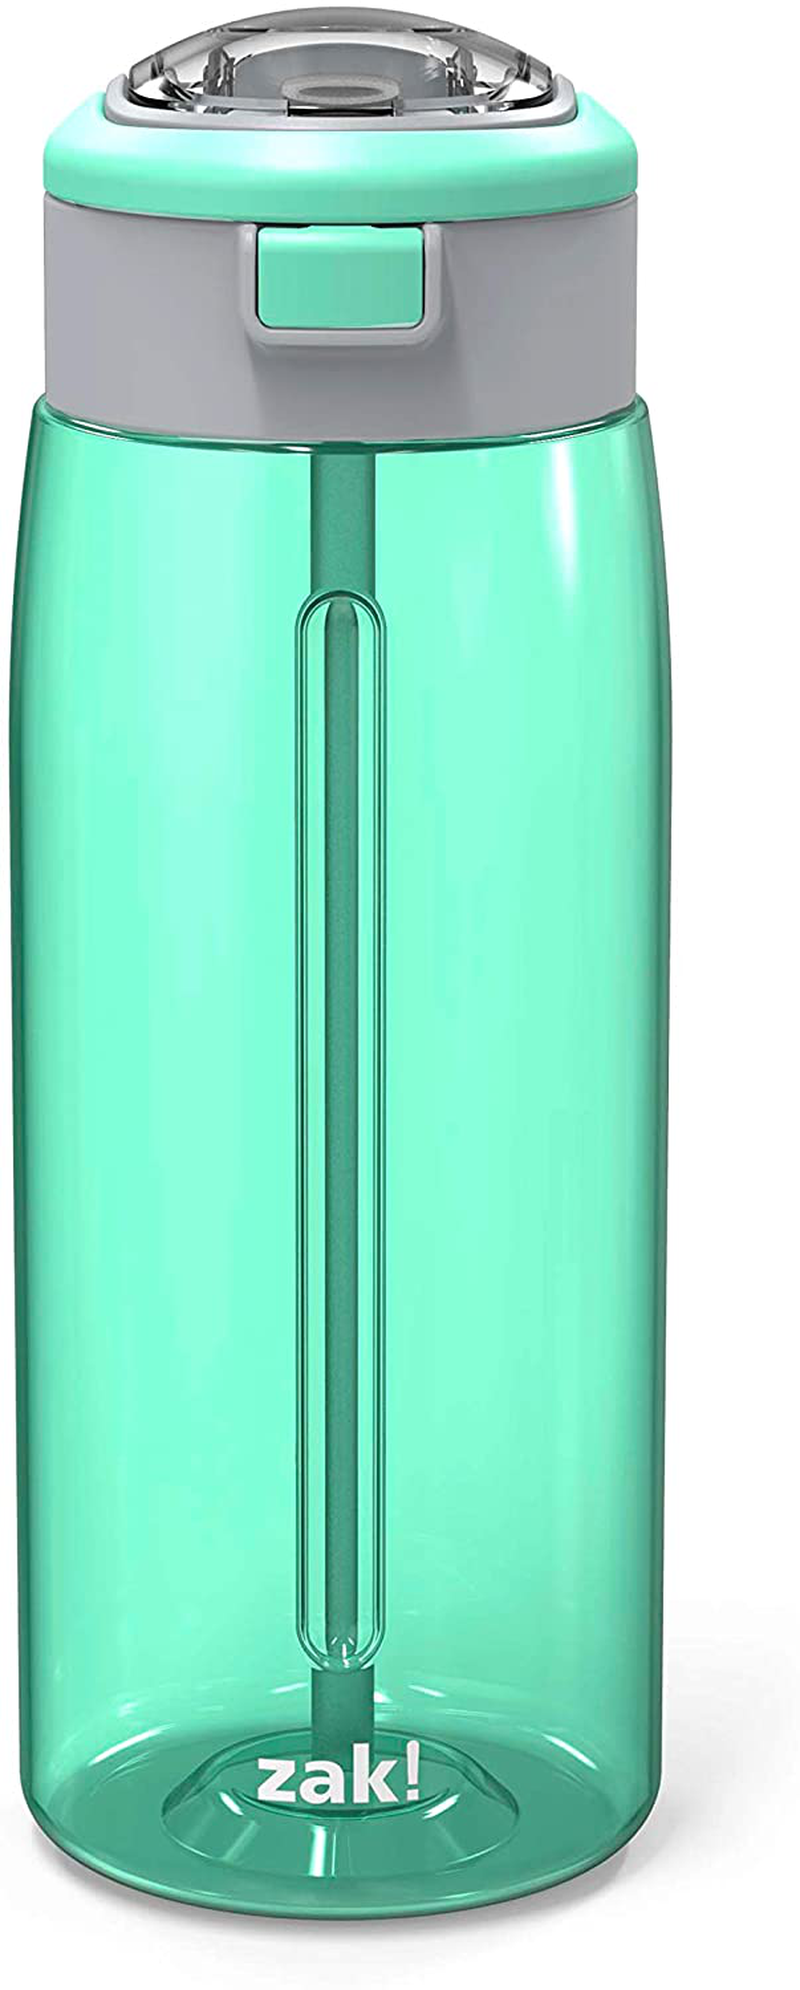 Zak Designs Genesis Durable Plastic Water Bottle with Interchangeable Lid and Built-In Carry Handle, Leak-Proof Design is Perfect for Outdoor Sports (64oz, Indigo)